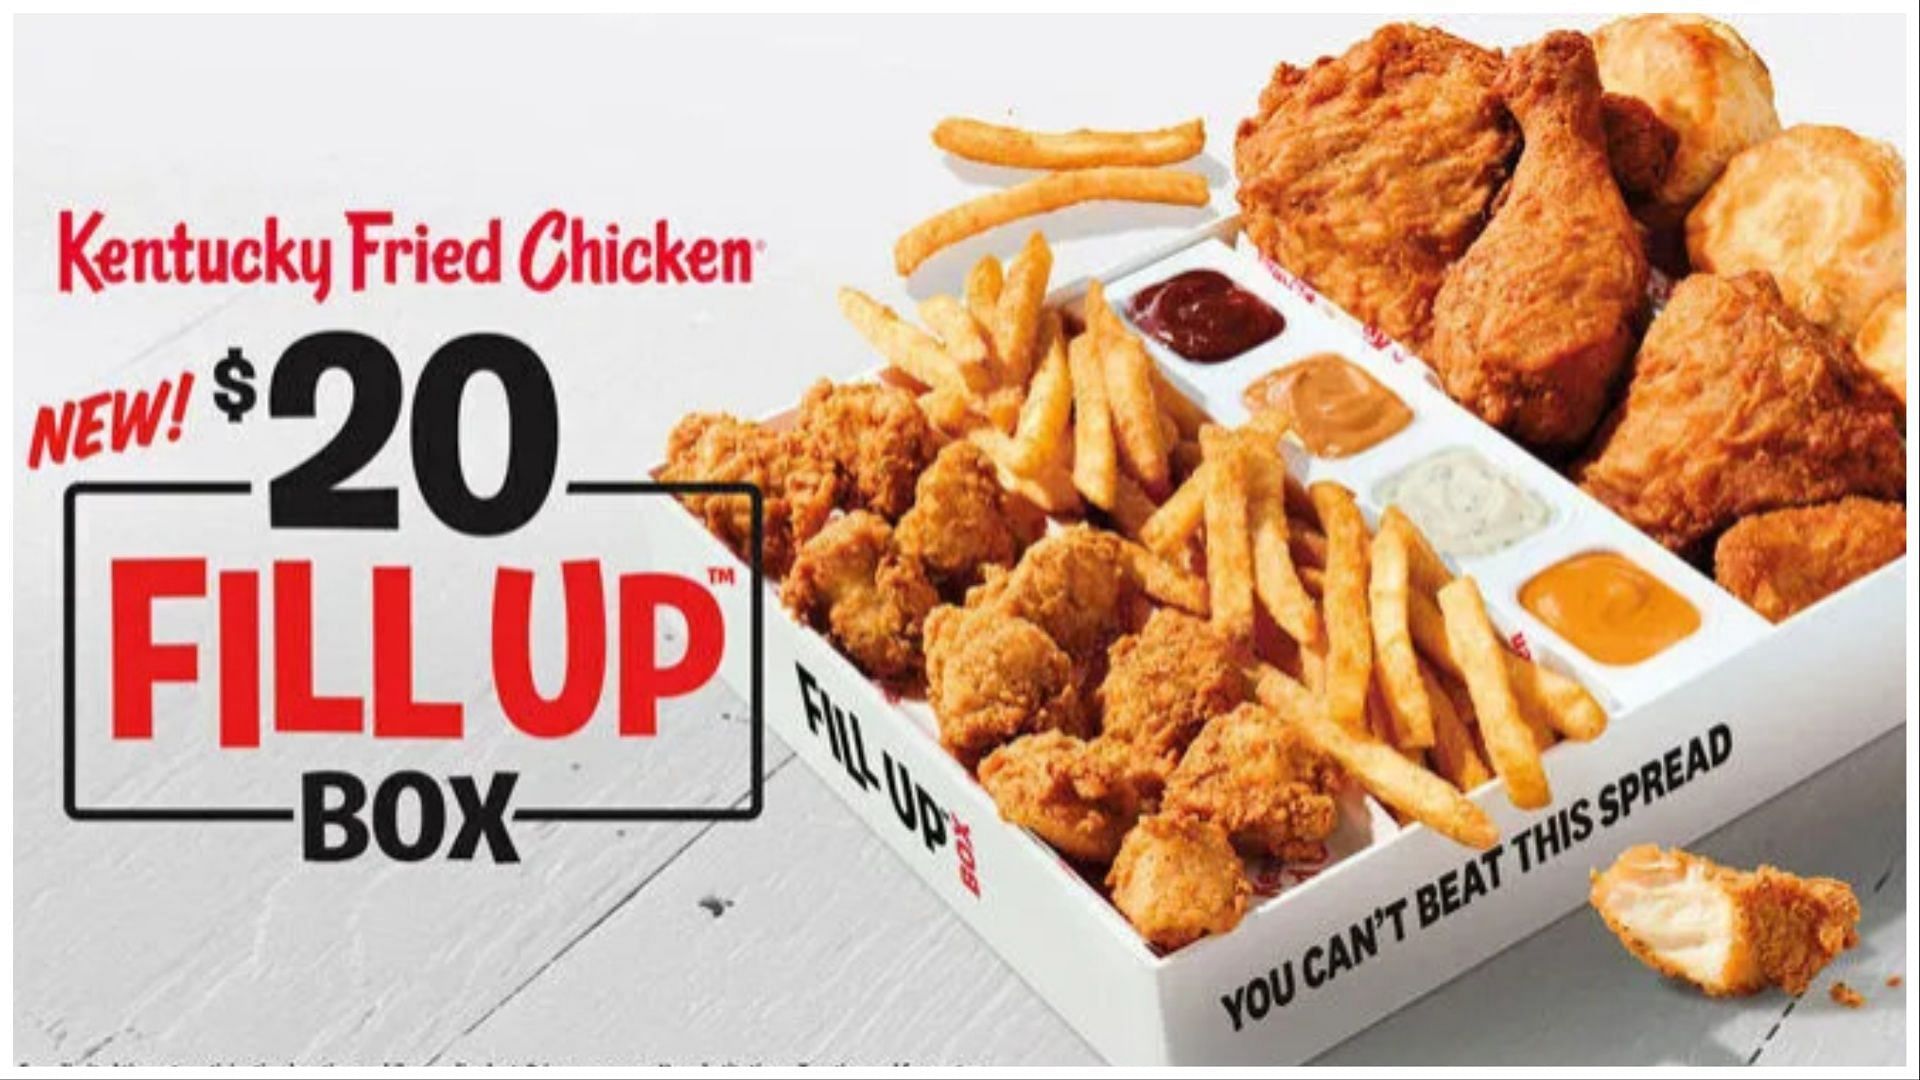 The company is back with another exciting offer (Image via KFC)